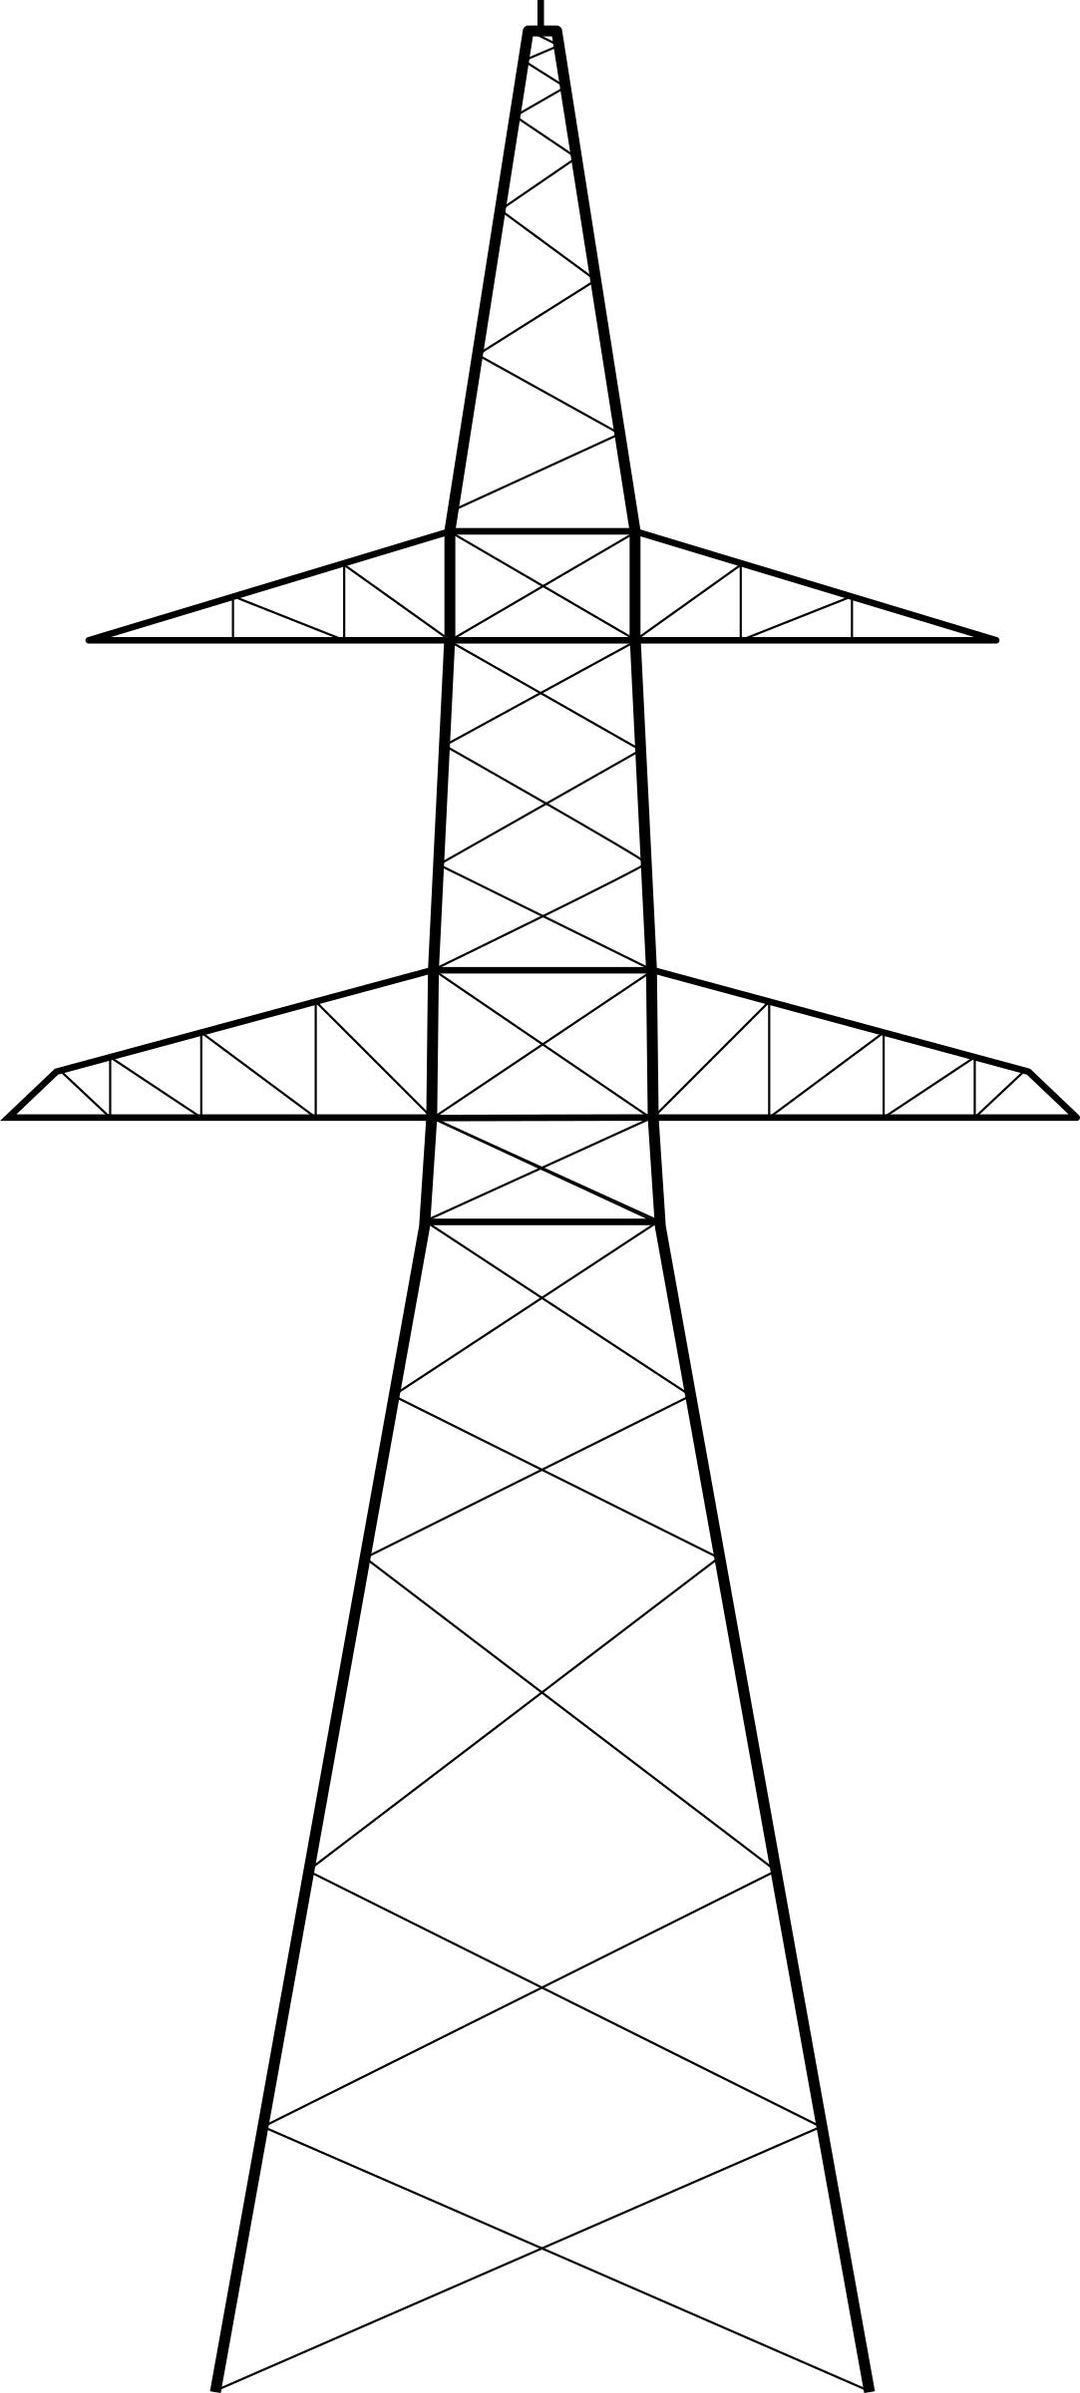 Transmission tower by Rones png transparent